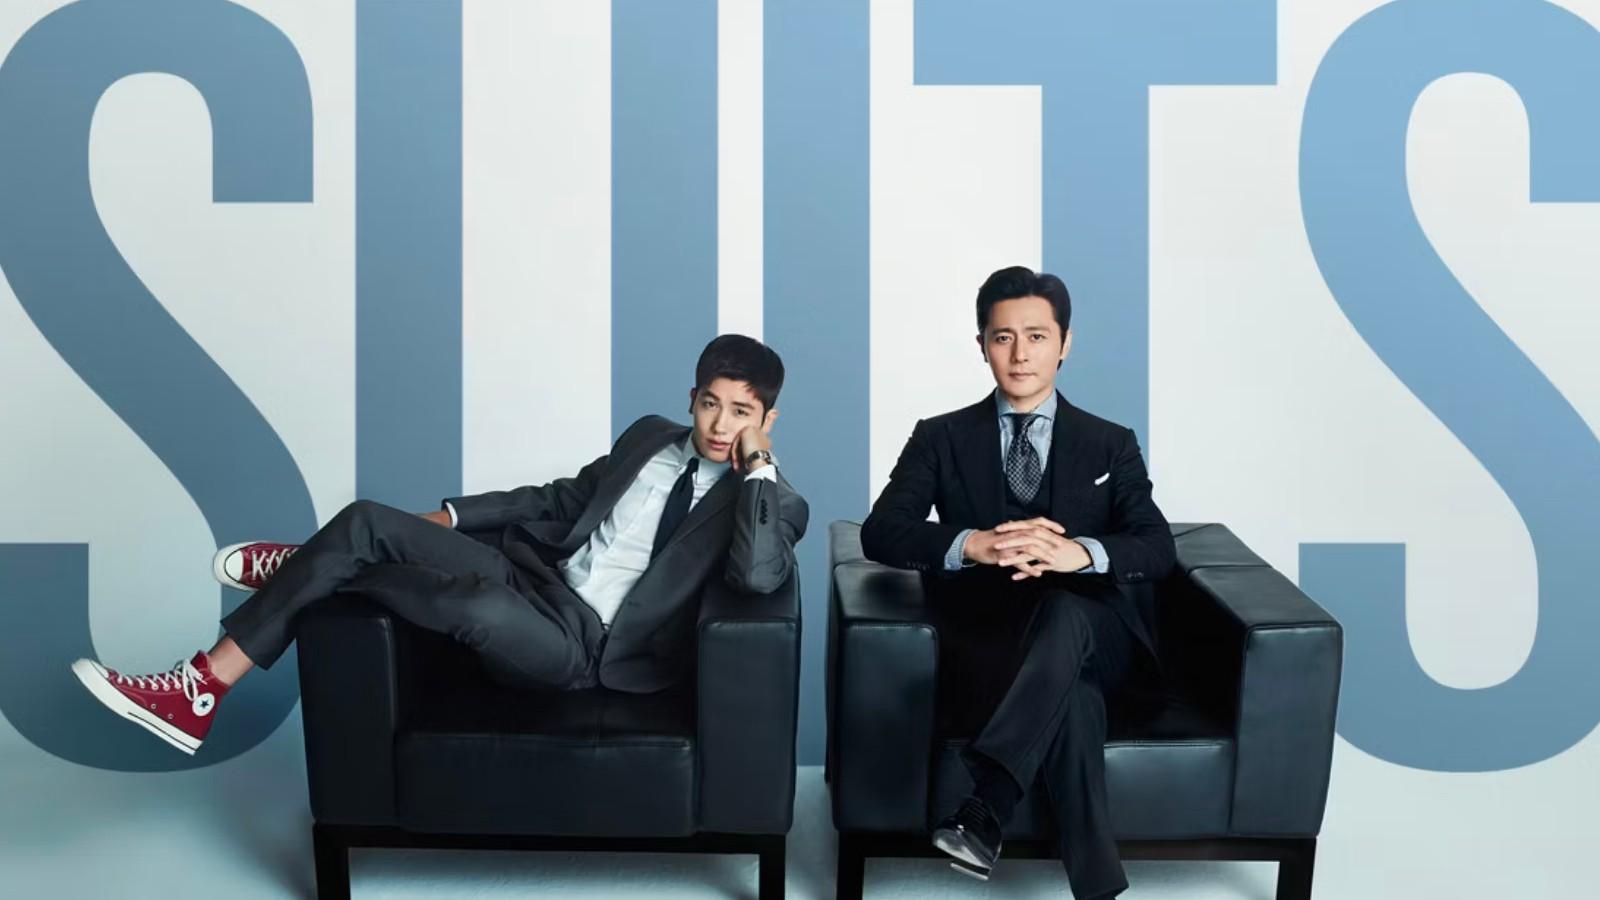 The stars of the Suits K-drama